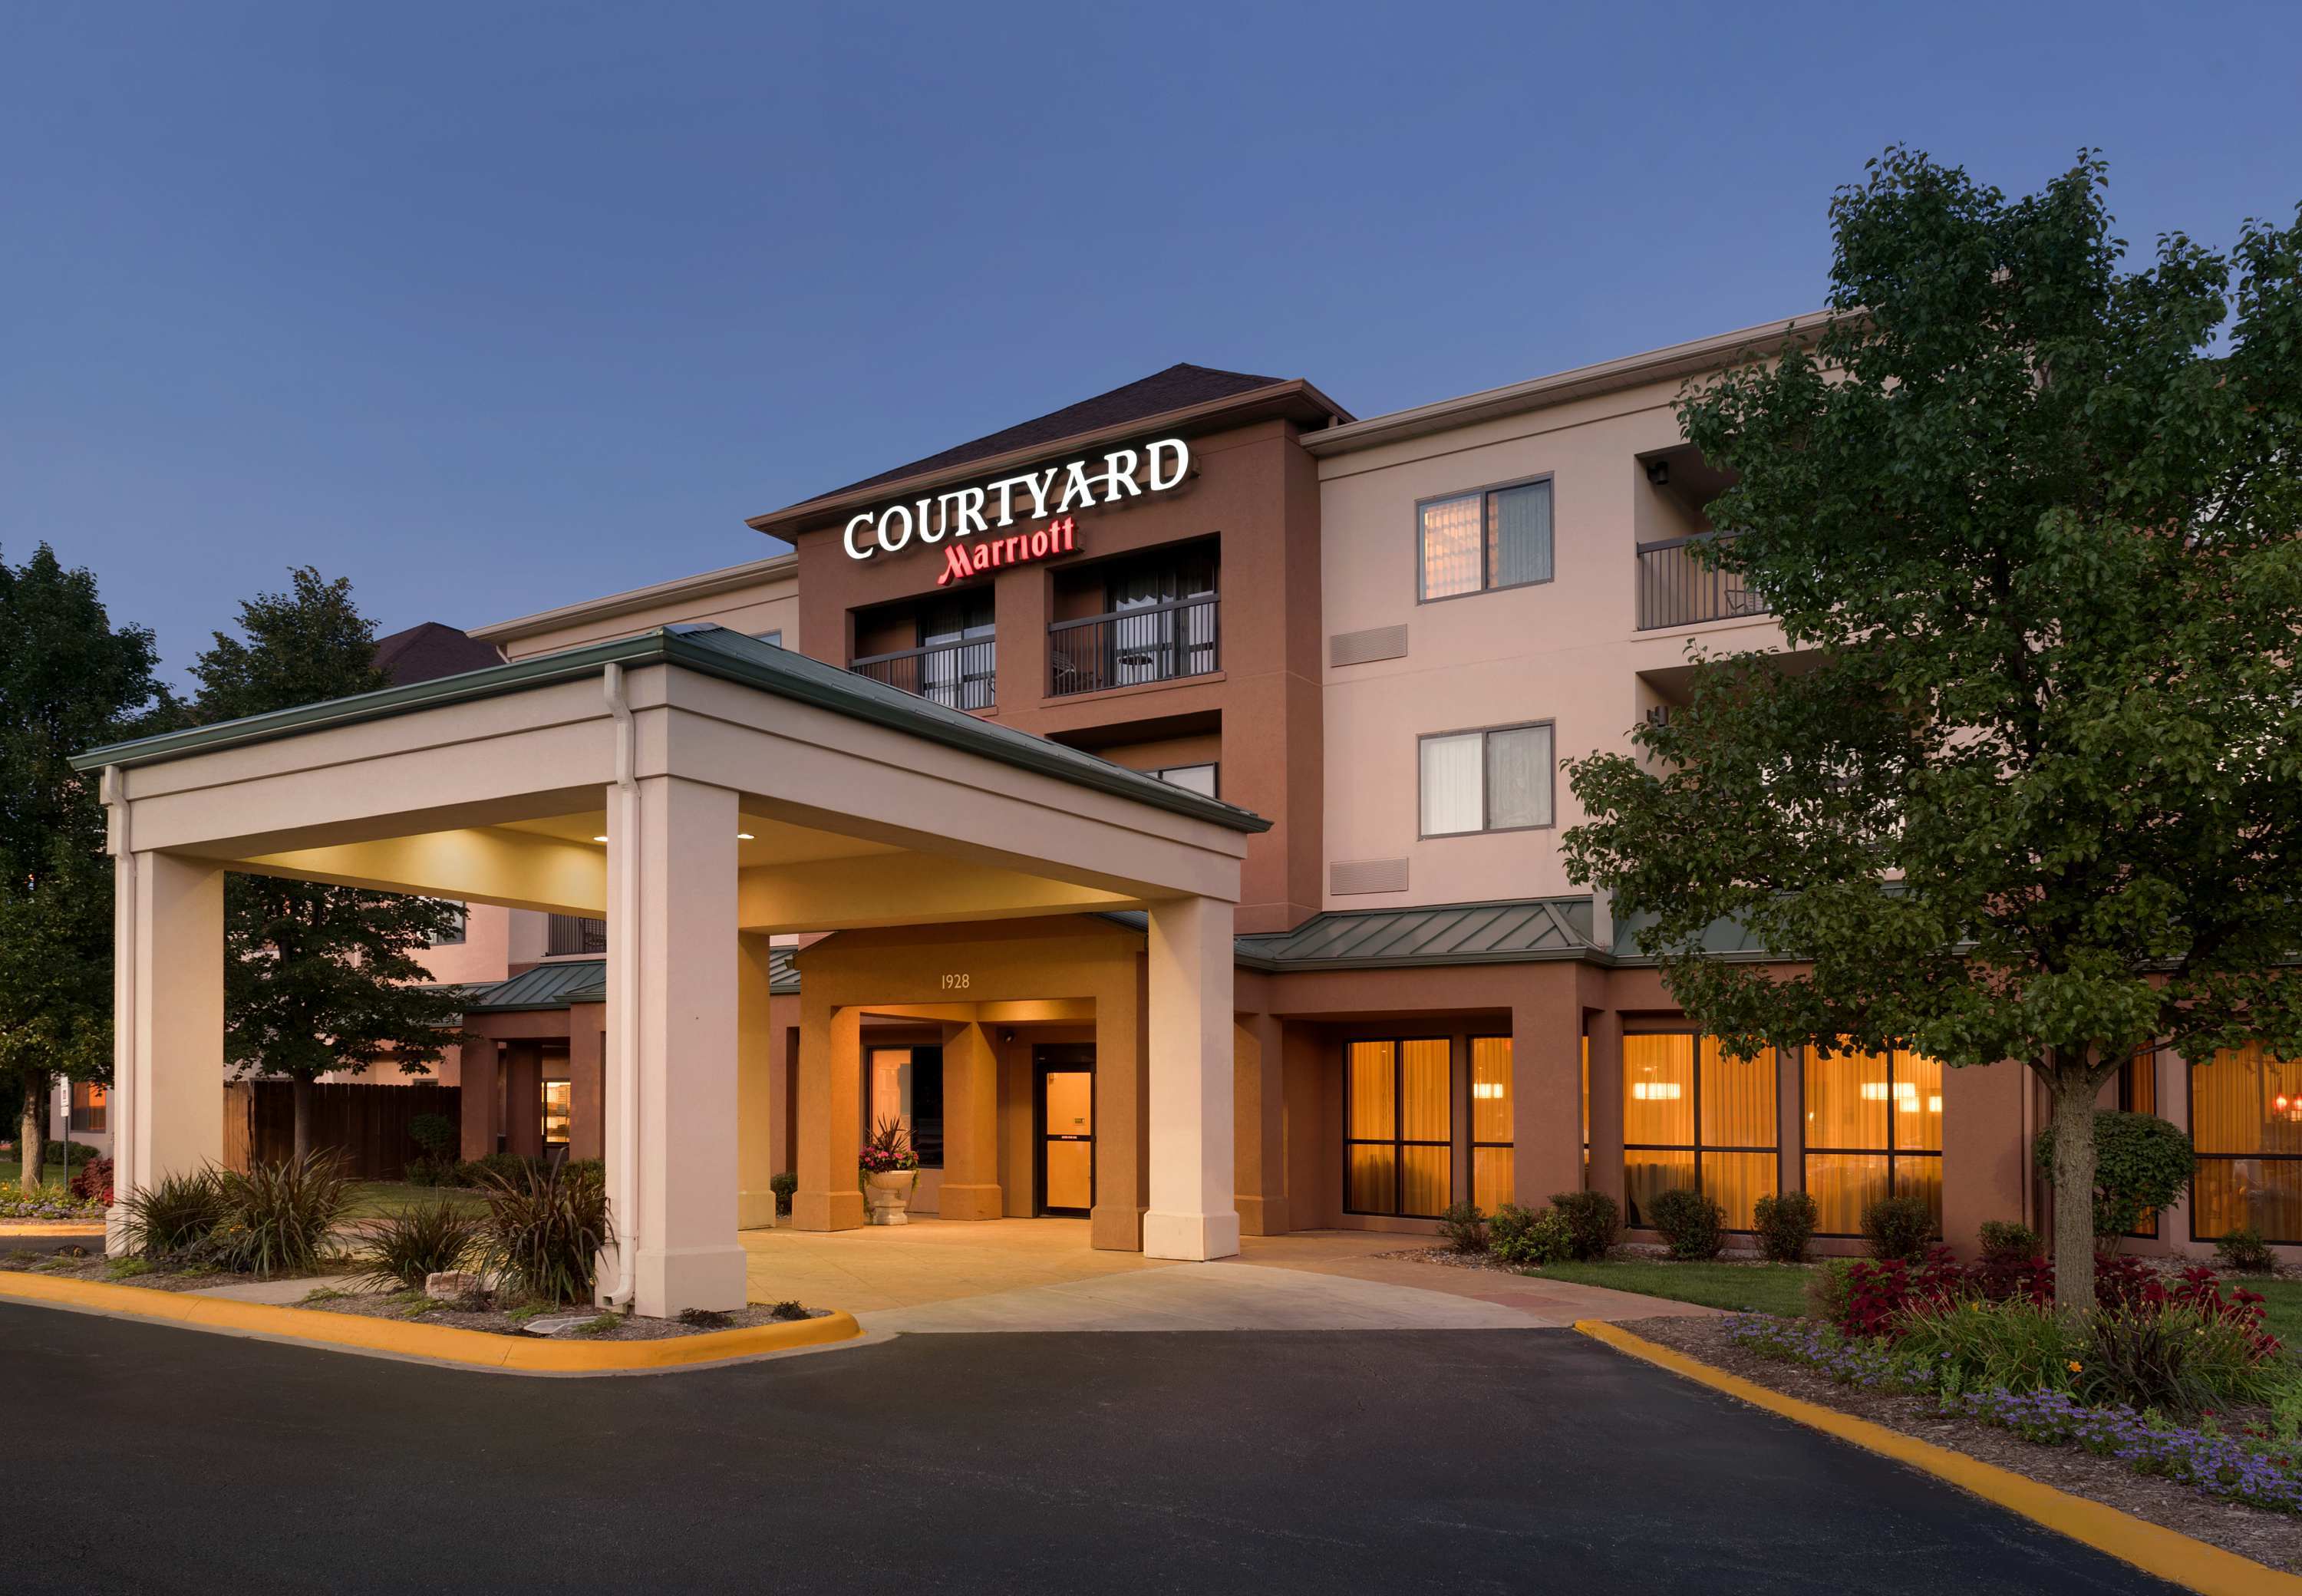 Photo of Courtyard by Marriott Peoria, Peoria, IL